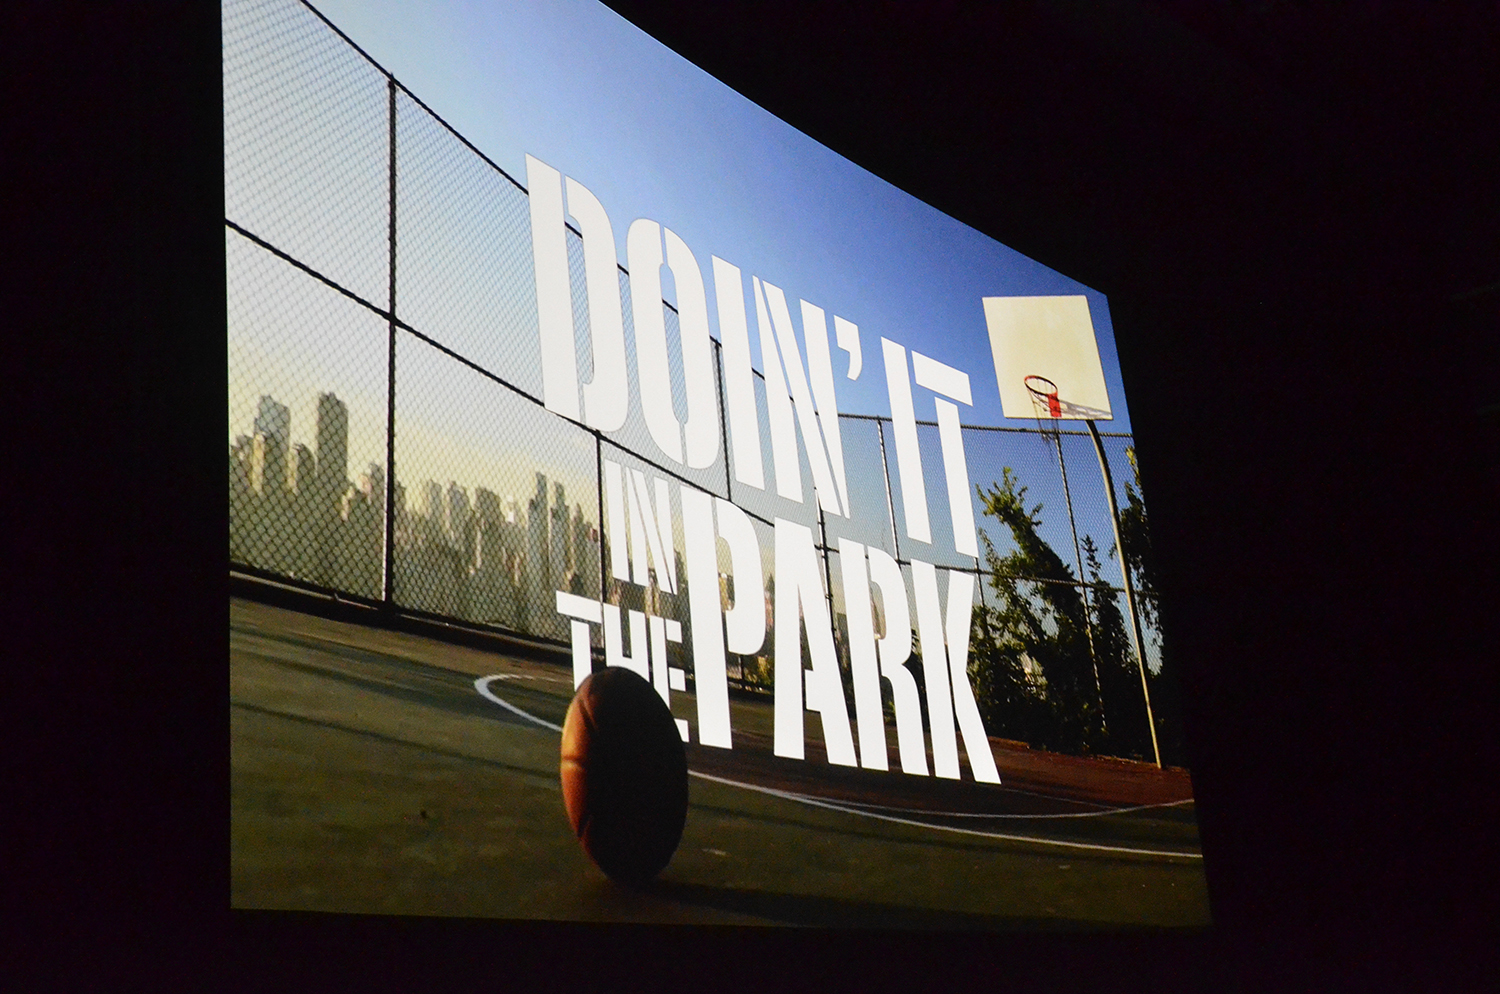 Shot at 180 courts in 75 days, the film covers a cross-section of players both professional and amateur, including Julius “Dr. J” Erving, Kenny Smith, “Pee Wee” Kirkland, “Fly” Williams, God Shammgod, Tim “Headache” Gittens, Corey “Homicide” Williams, Kenny Anderson, Jack Ryan, Richard “Crazy Legs” Colon, Niki Avery, Milani Malik, and the Park Pick-Up Players of New York City. The filmmakers traveled to most of the film locations by bicycle, carrying camera equipment and a basketball in their backpacks.